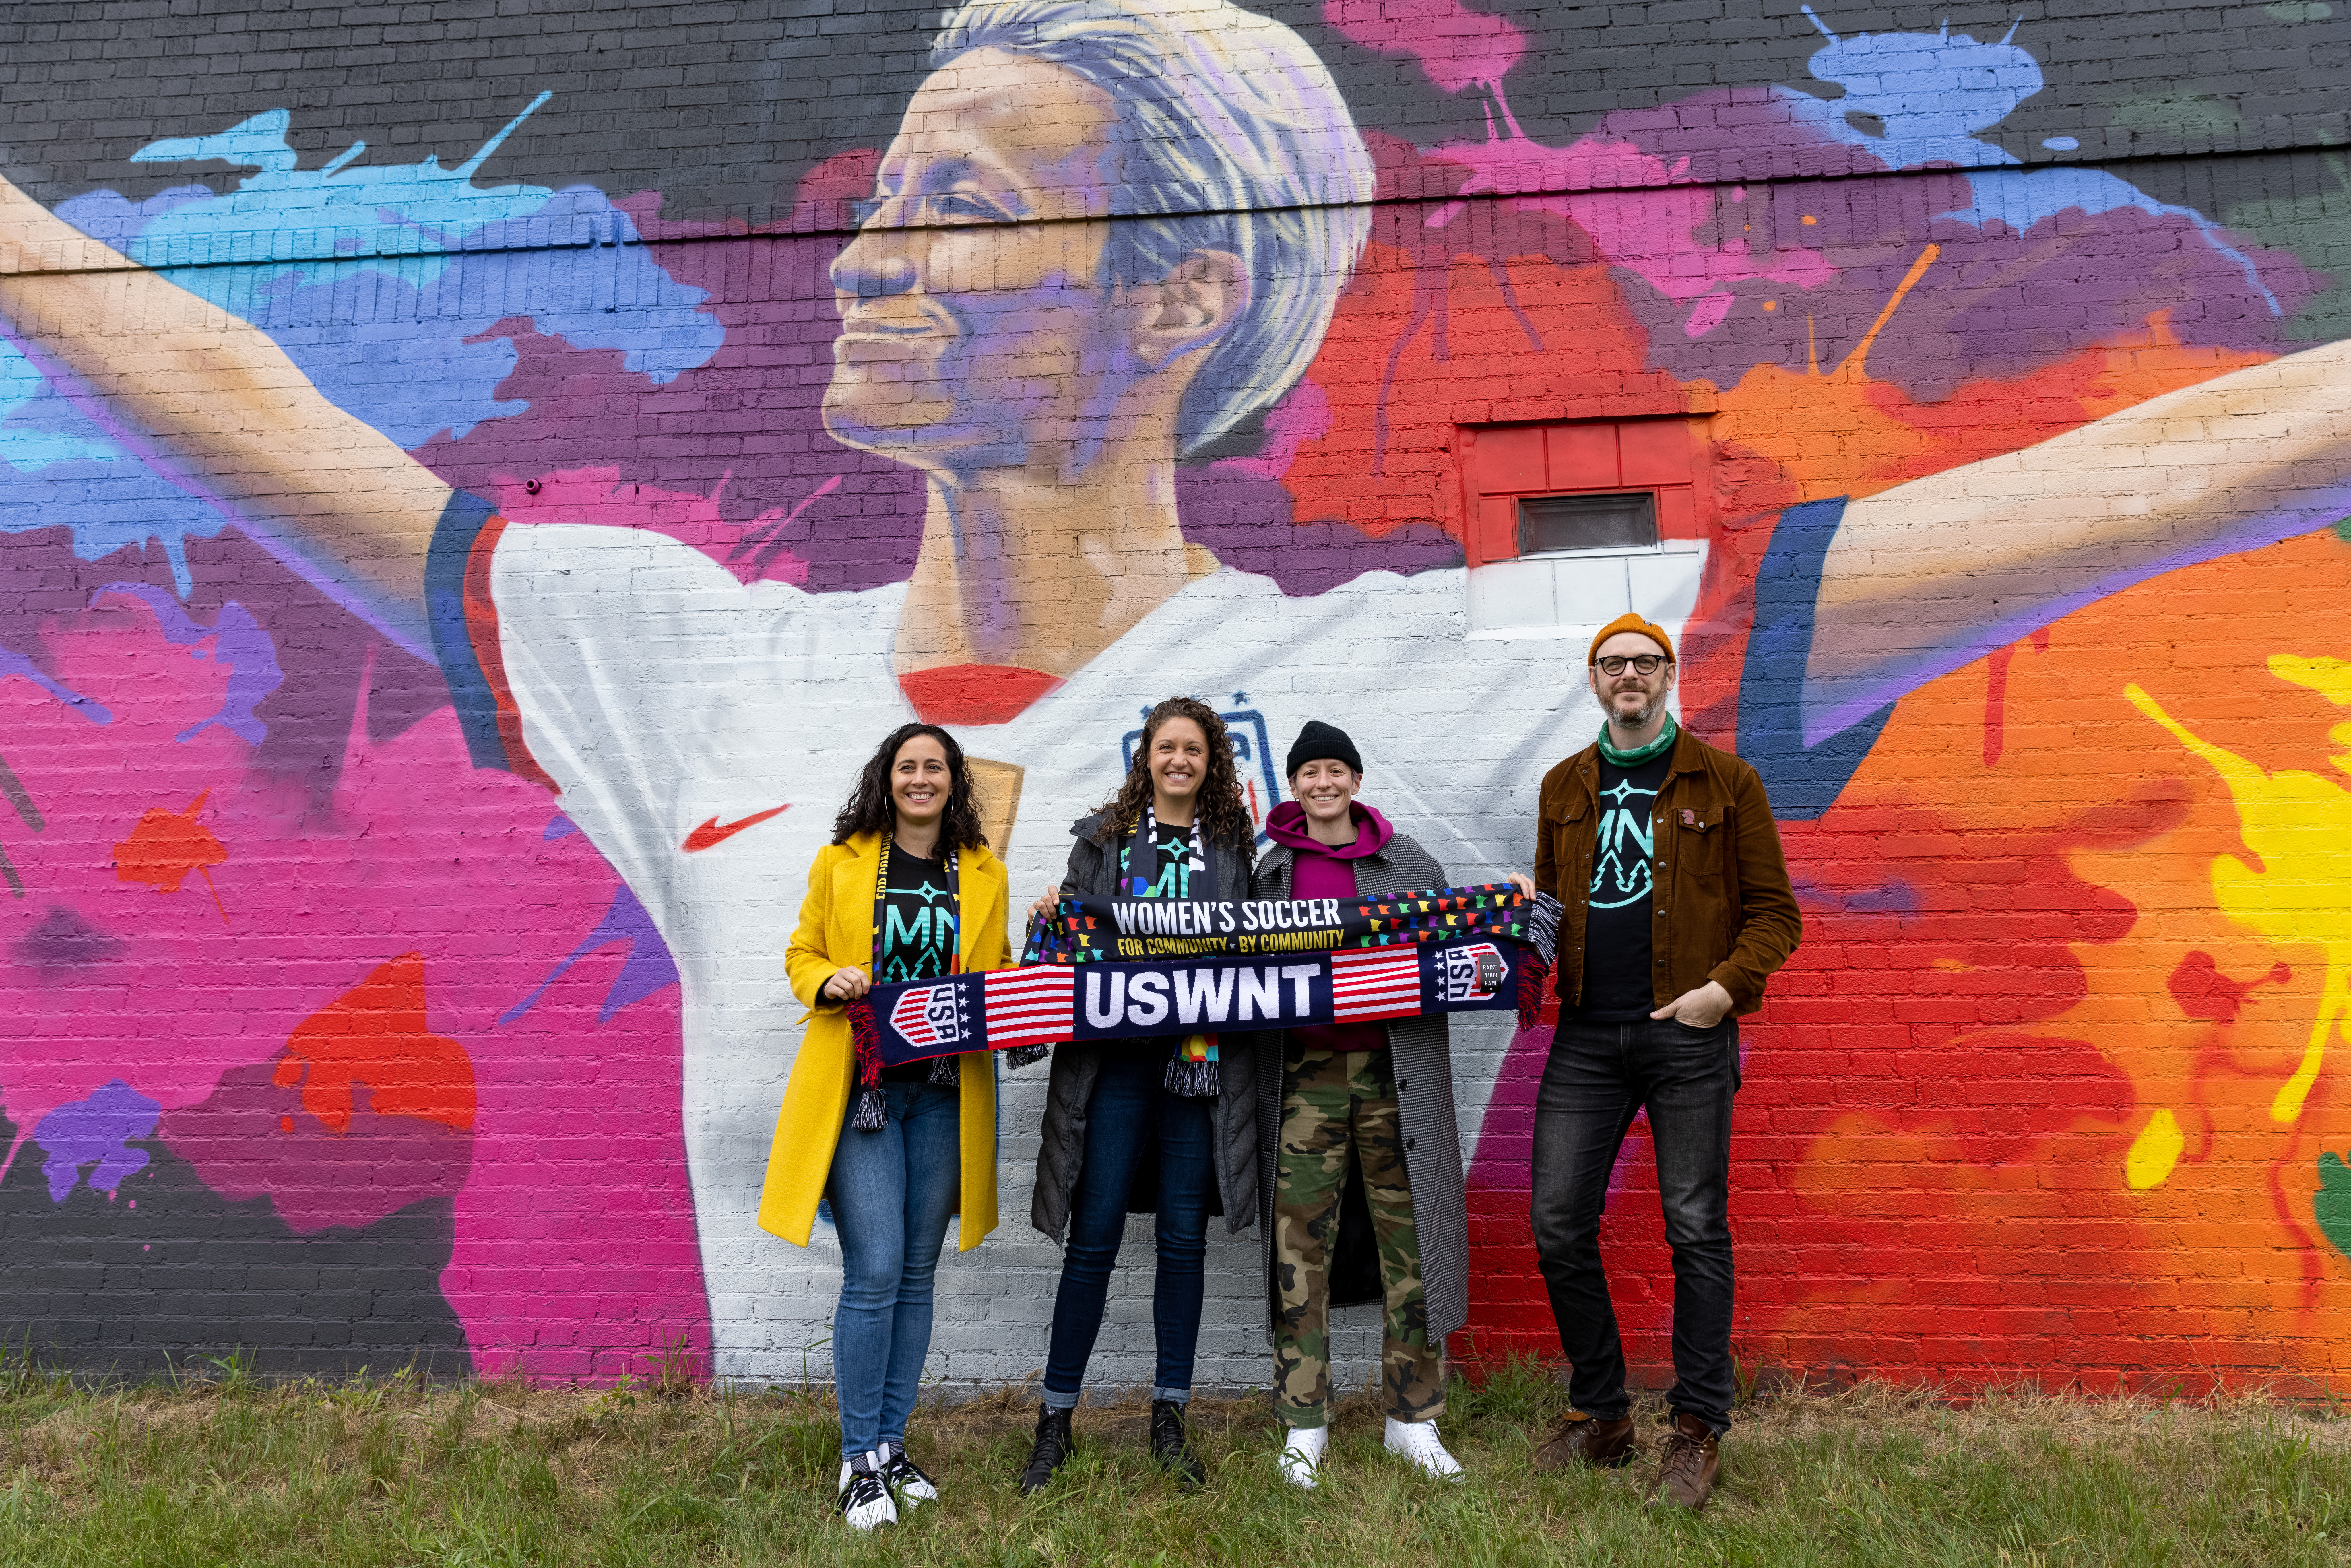 A mural depicting Megan Rapinoe outside The Black Hart of St. Paul, a queer soccer bar owned by Wes Burdine